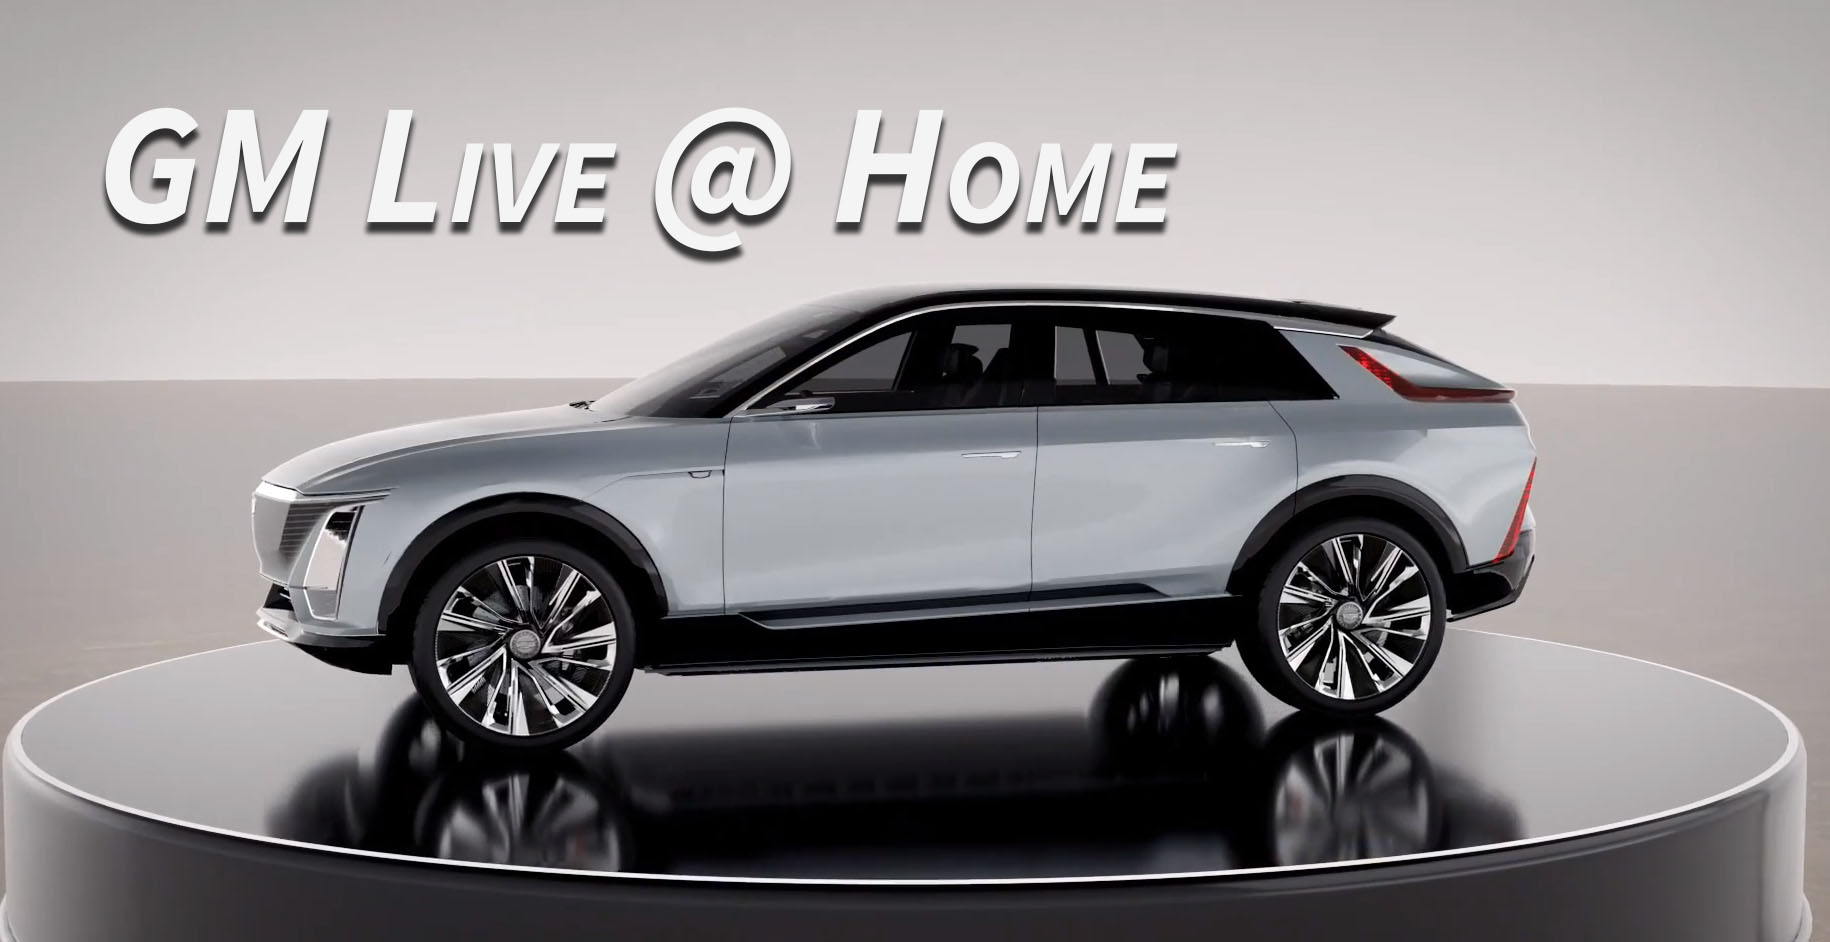 General Motors To Launch "GM Live @ Home" - Virtual Auto Shows & Direct Sales On The Way?